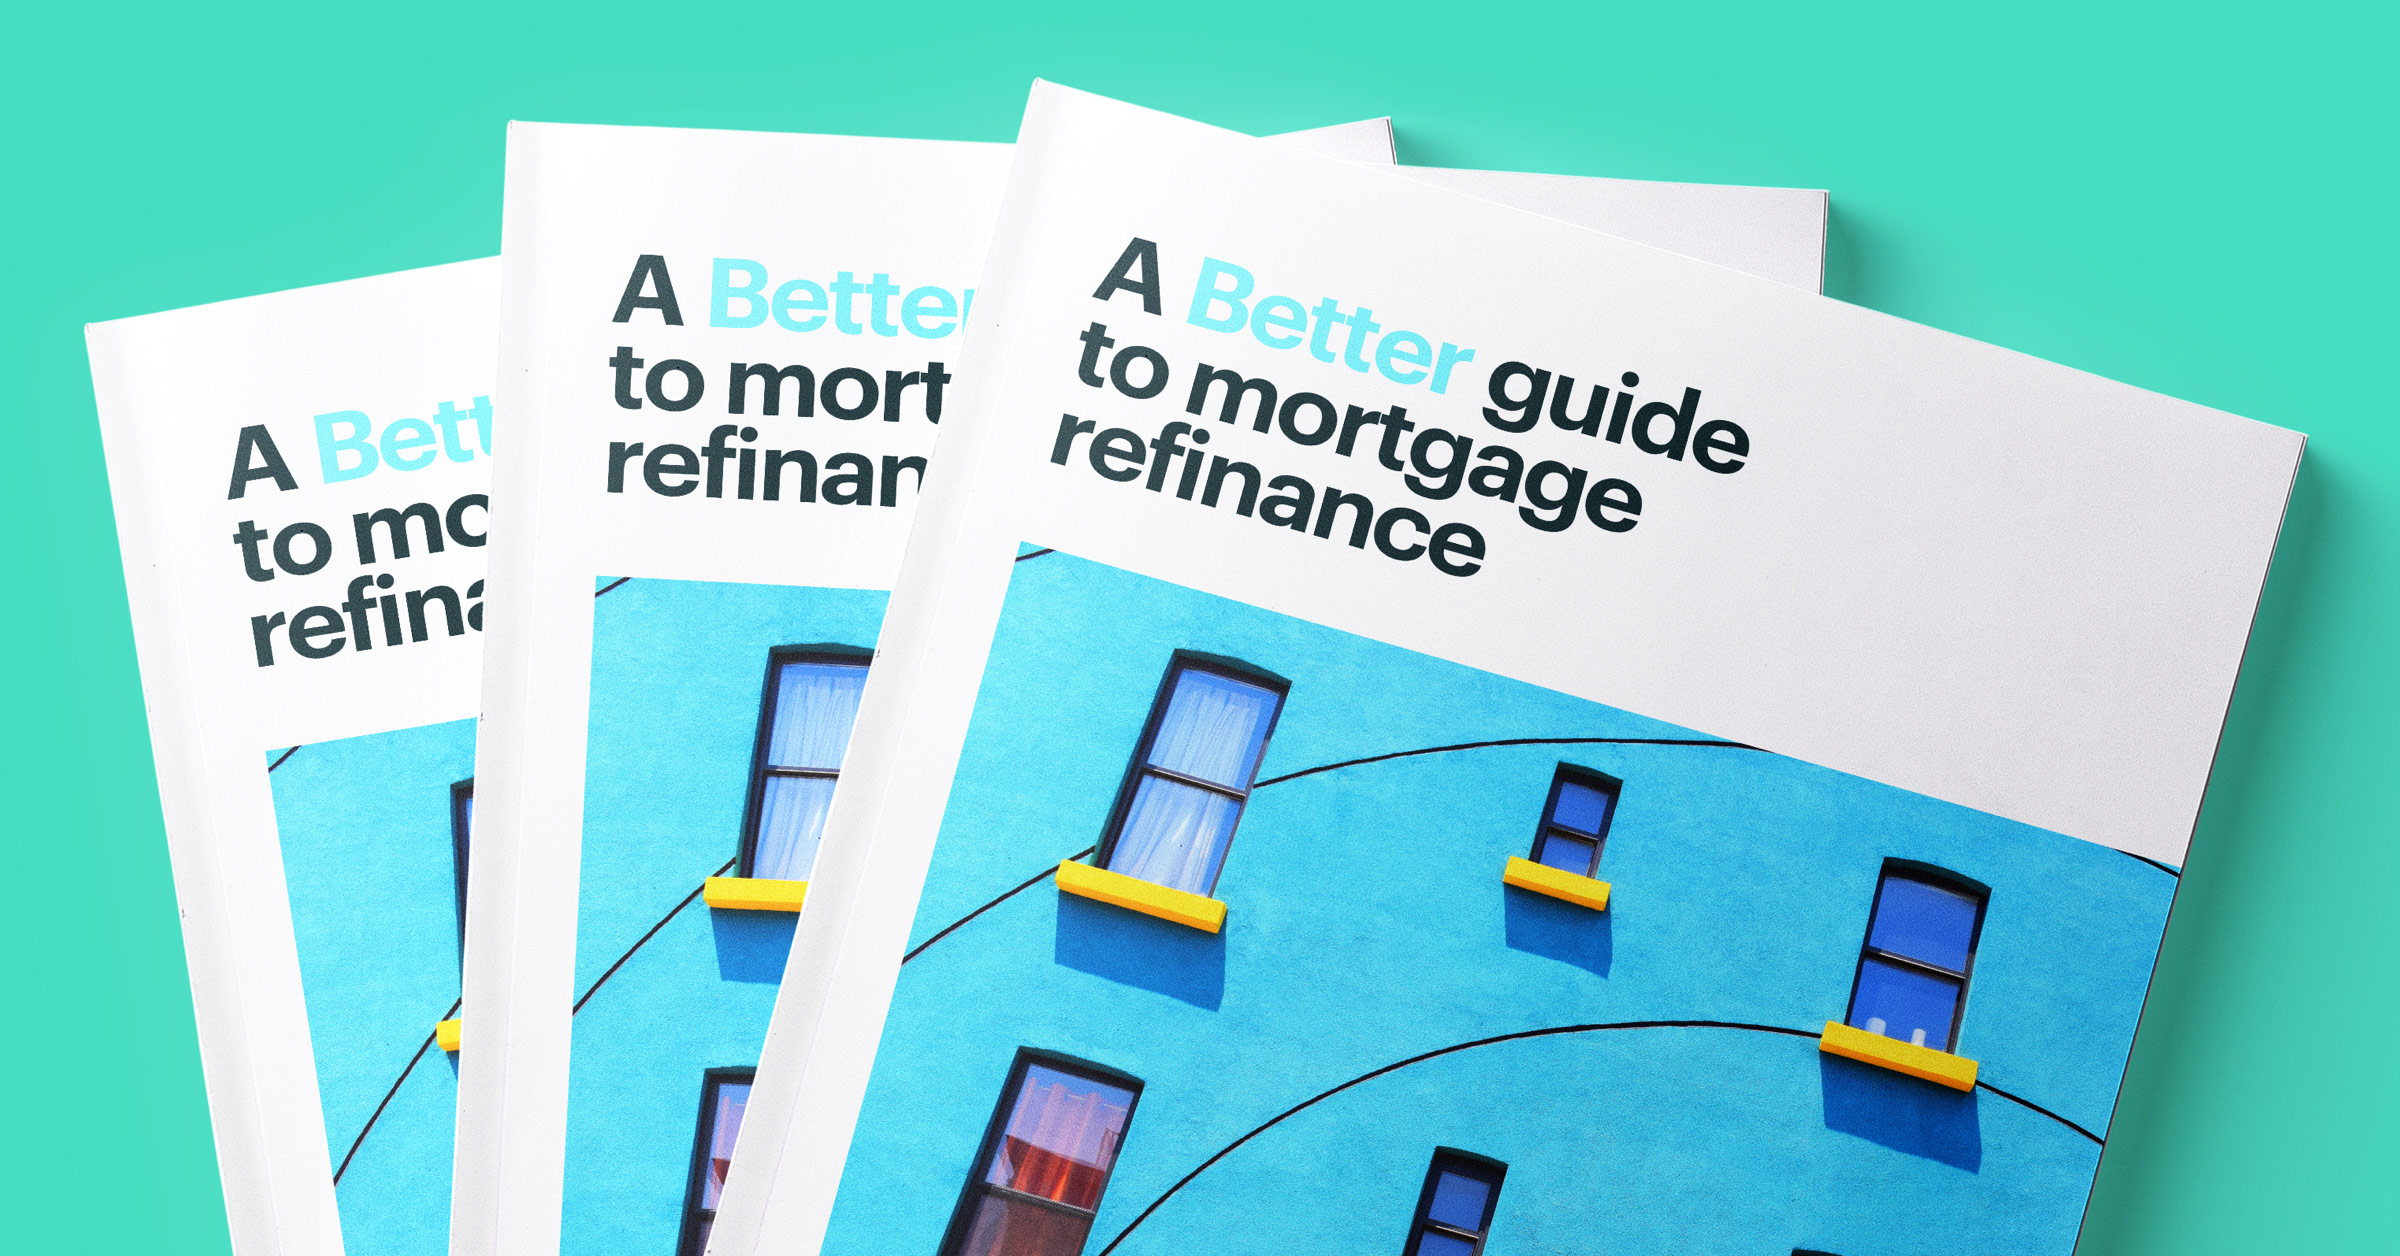  Image of Three Guide Books Titled A Better Guide to Mortgage Refinance